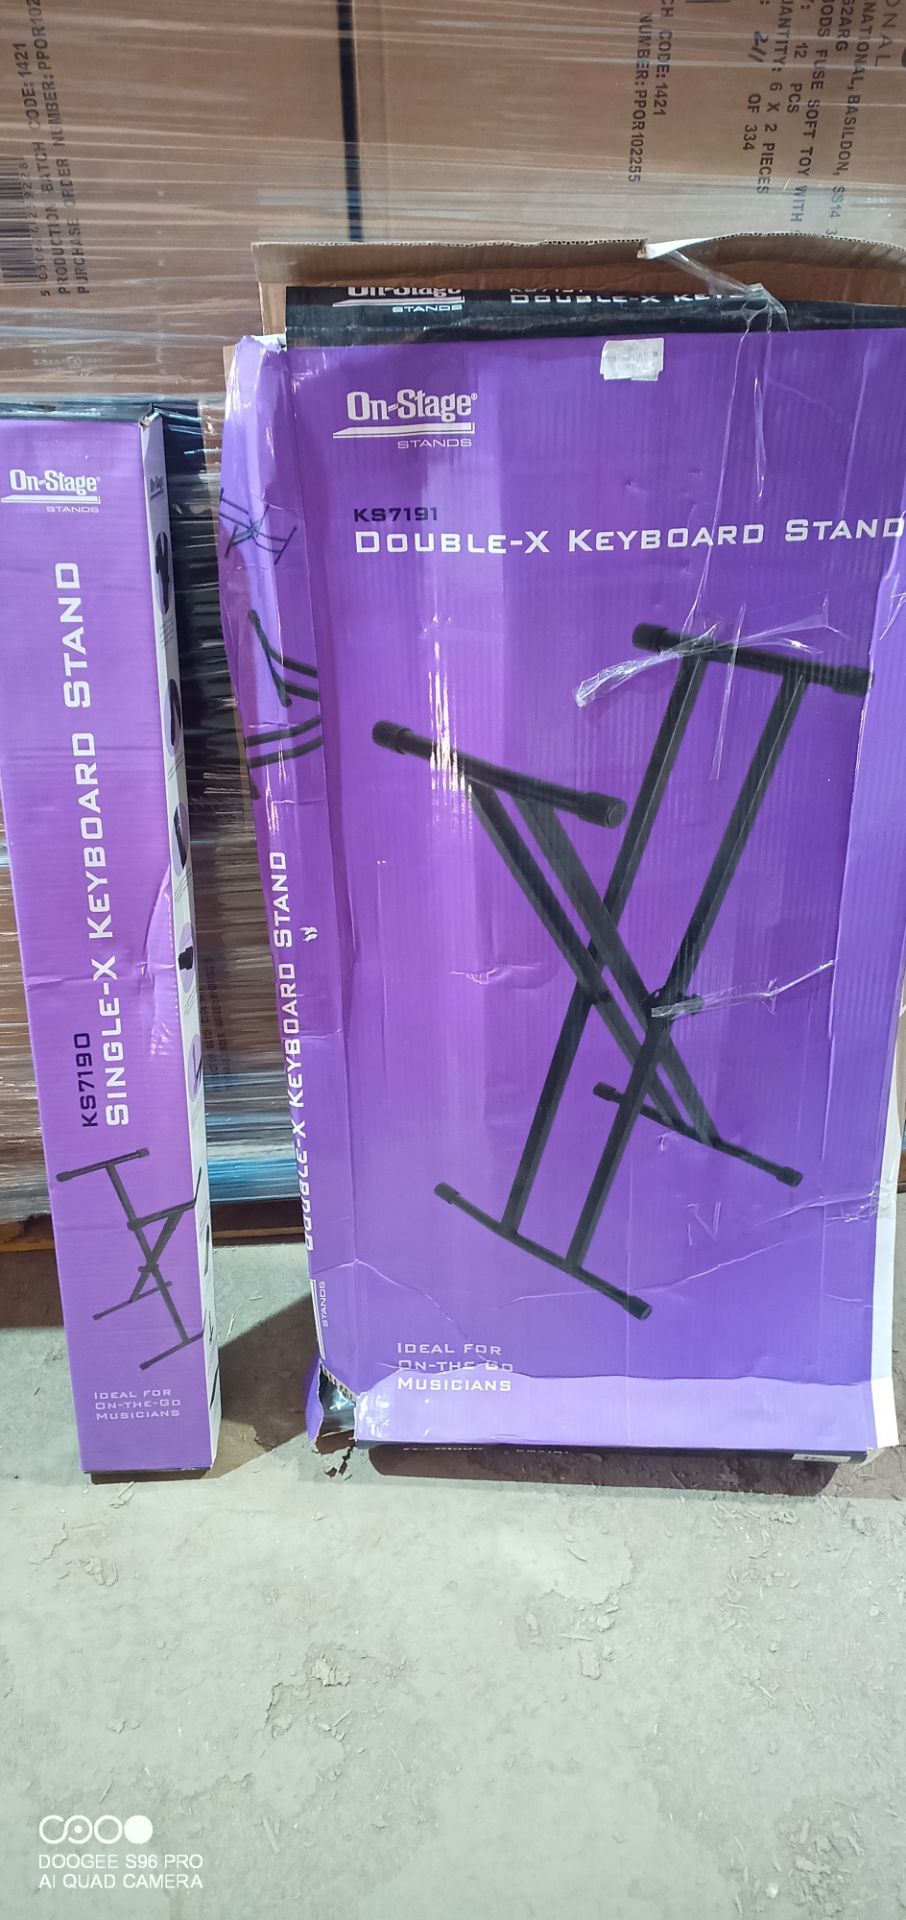 2. music stands as pictured - look new unused possible damage packaging